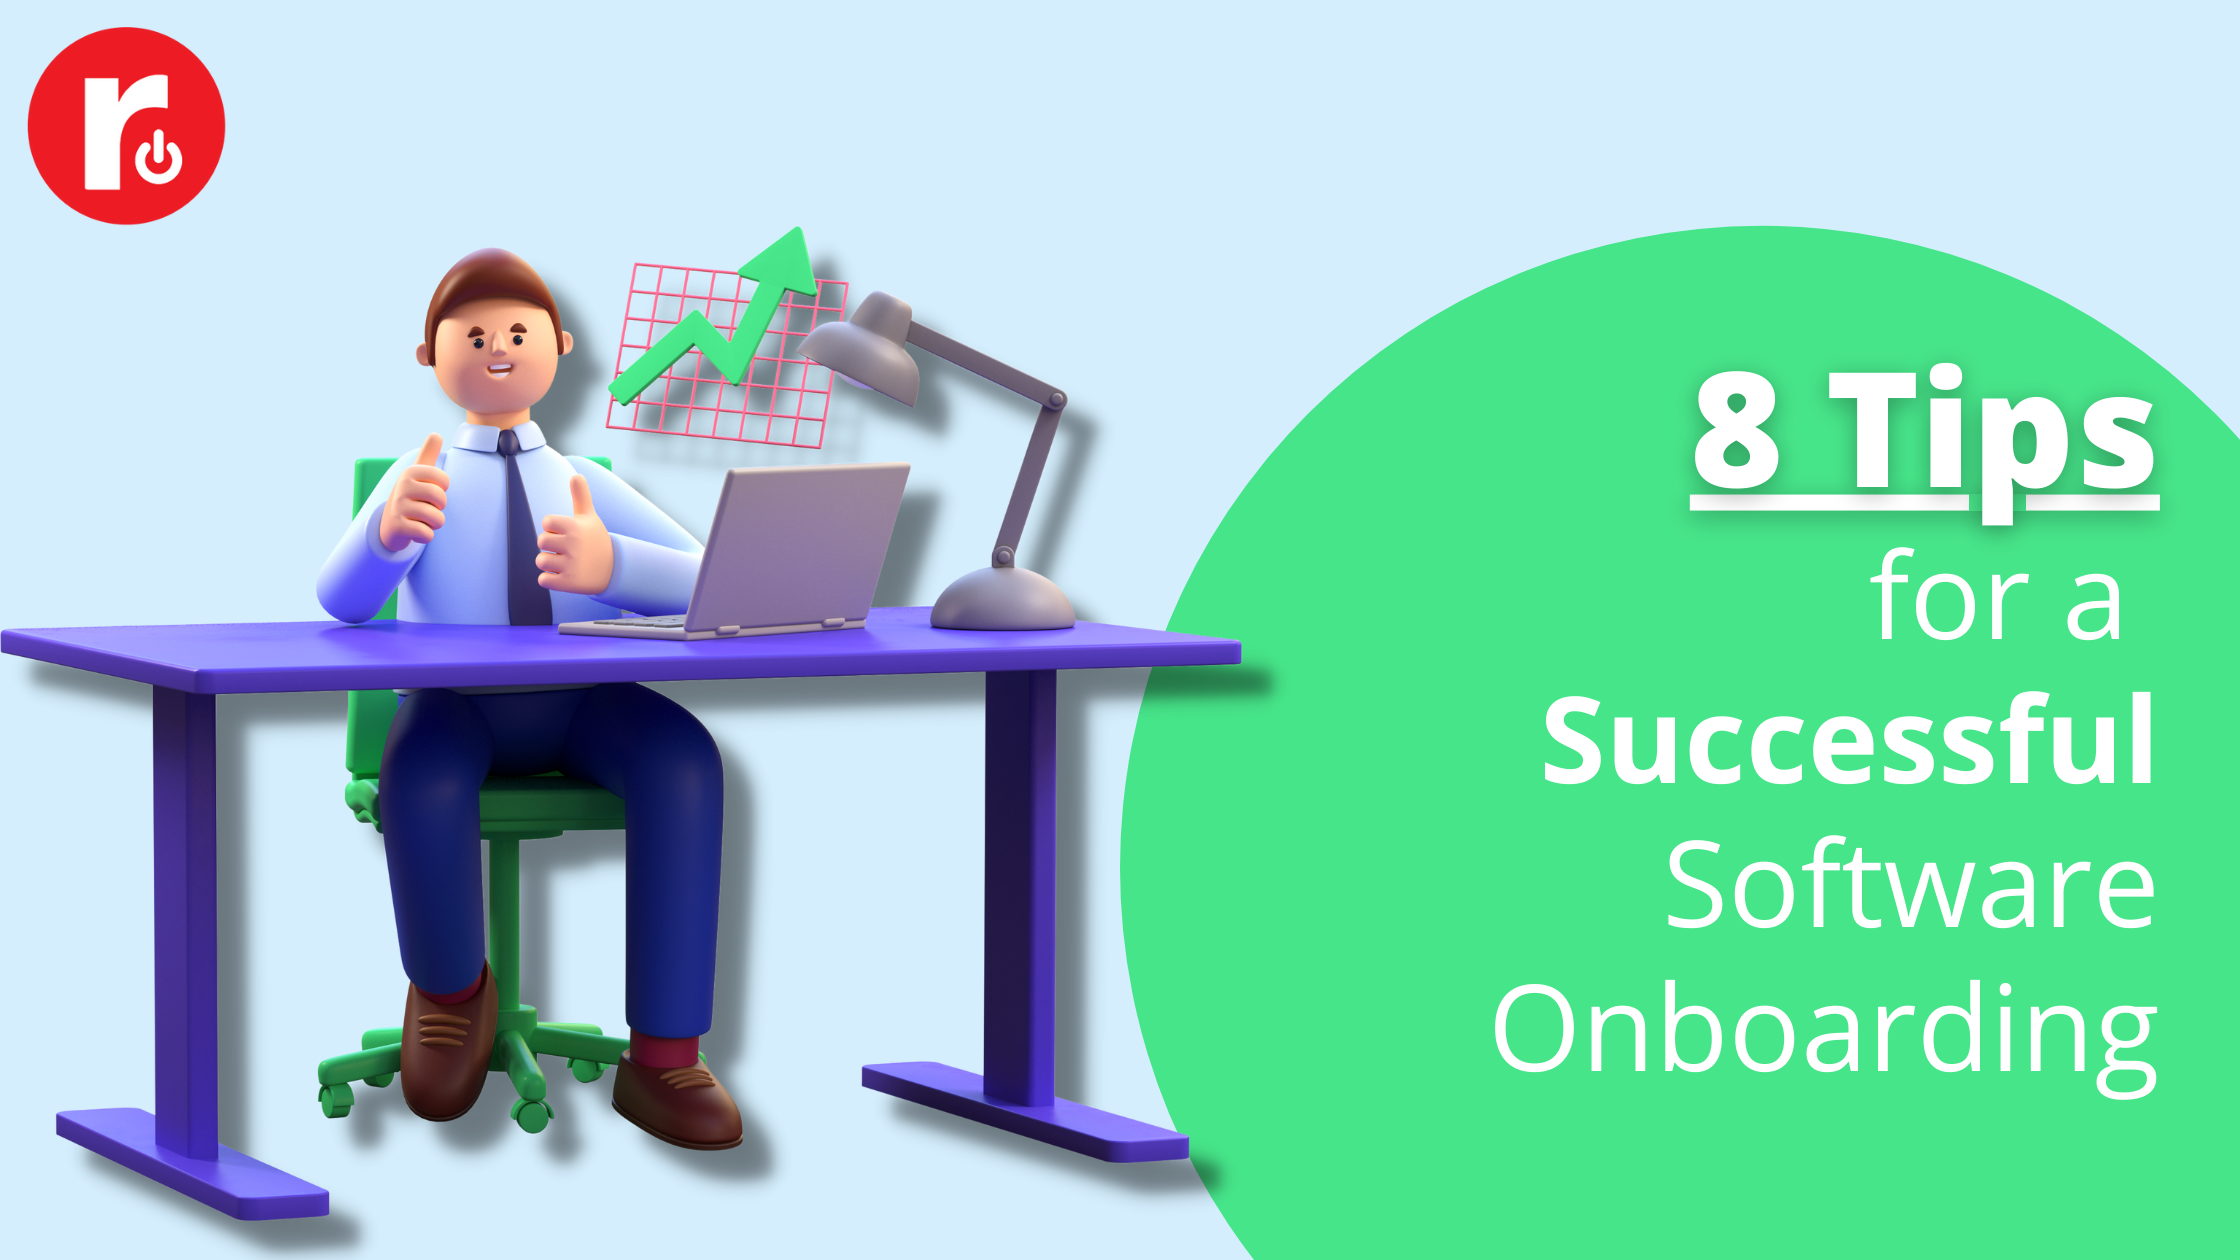 8 Tips for a Successful Software Onboarding